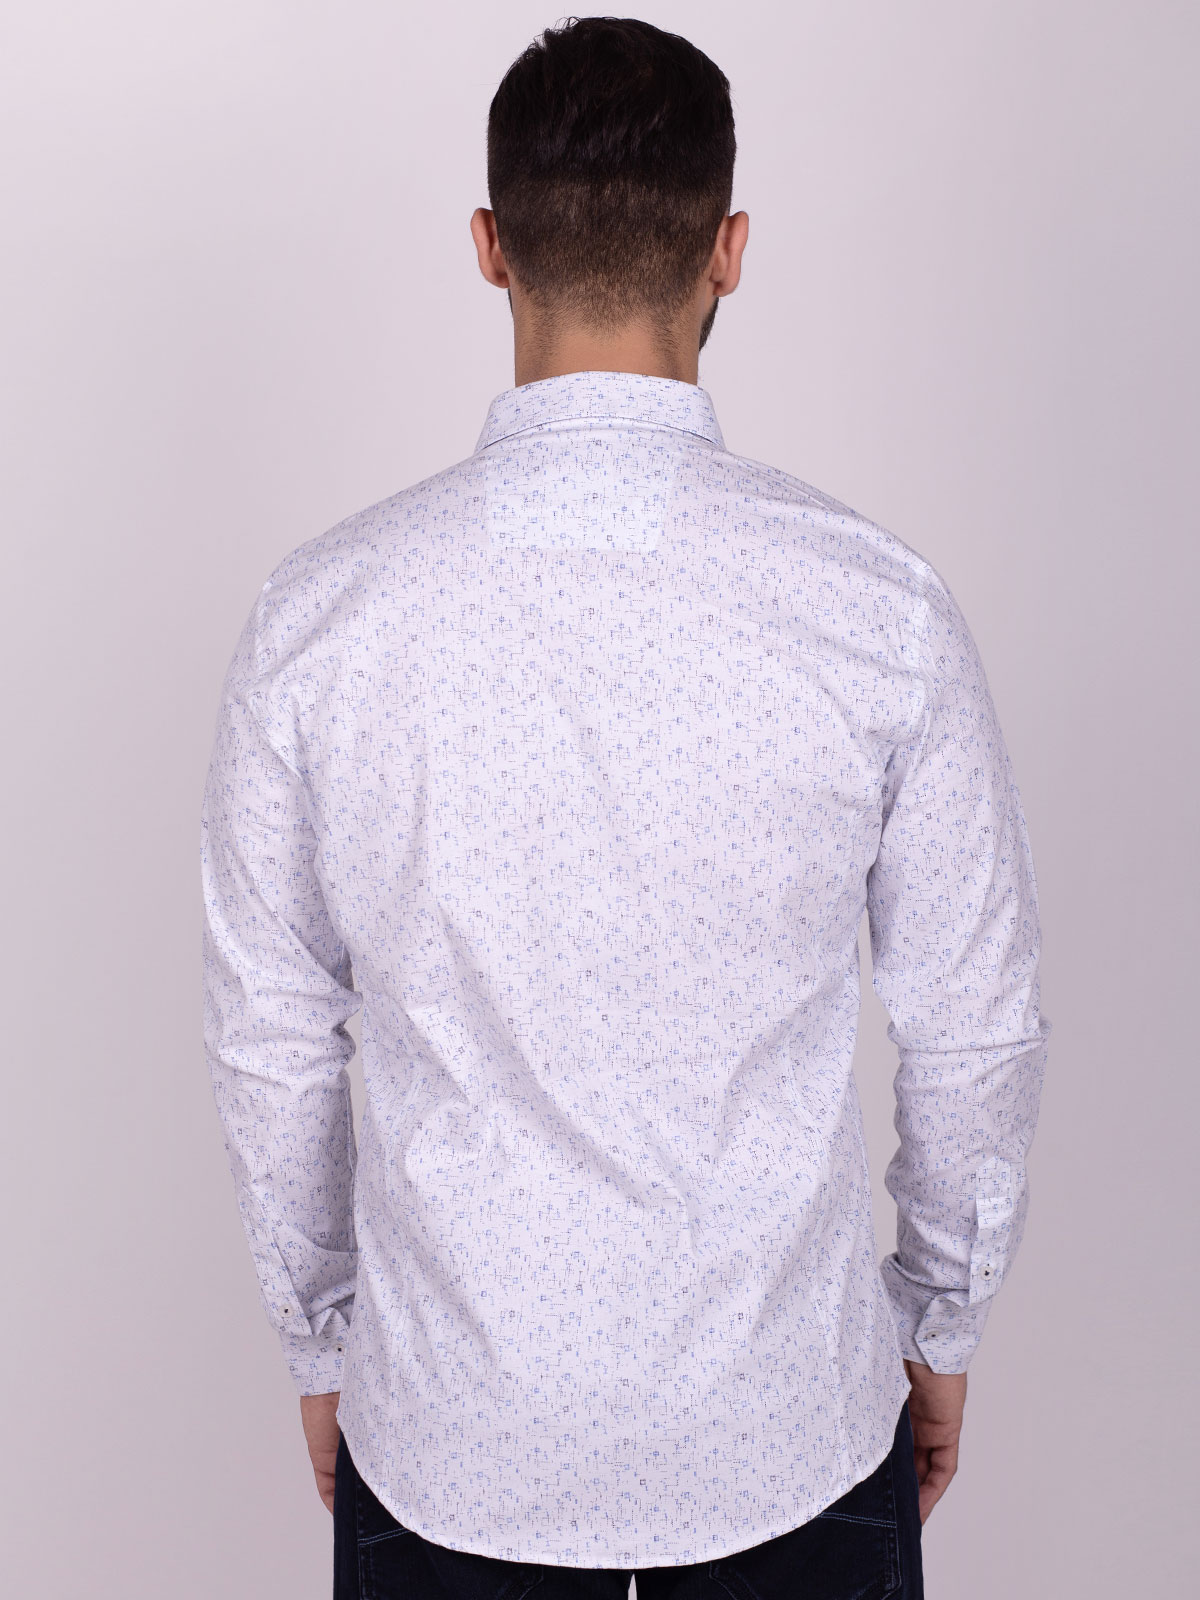 White shirt with a print of blue figures - 21515 € 43.87 img4